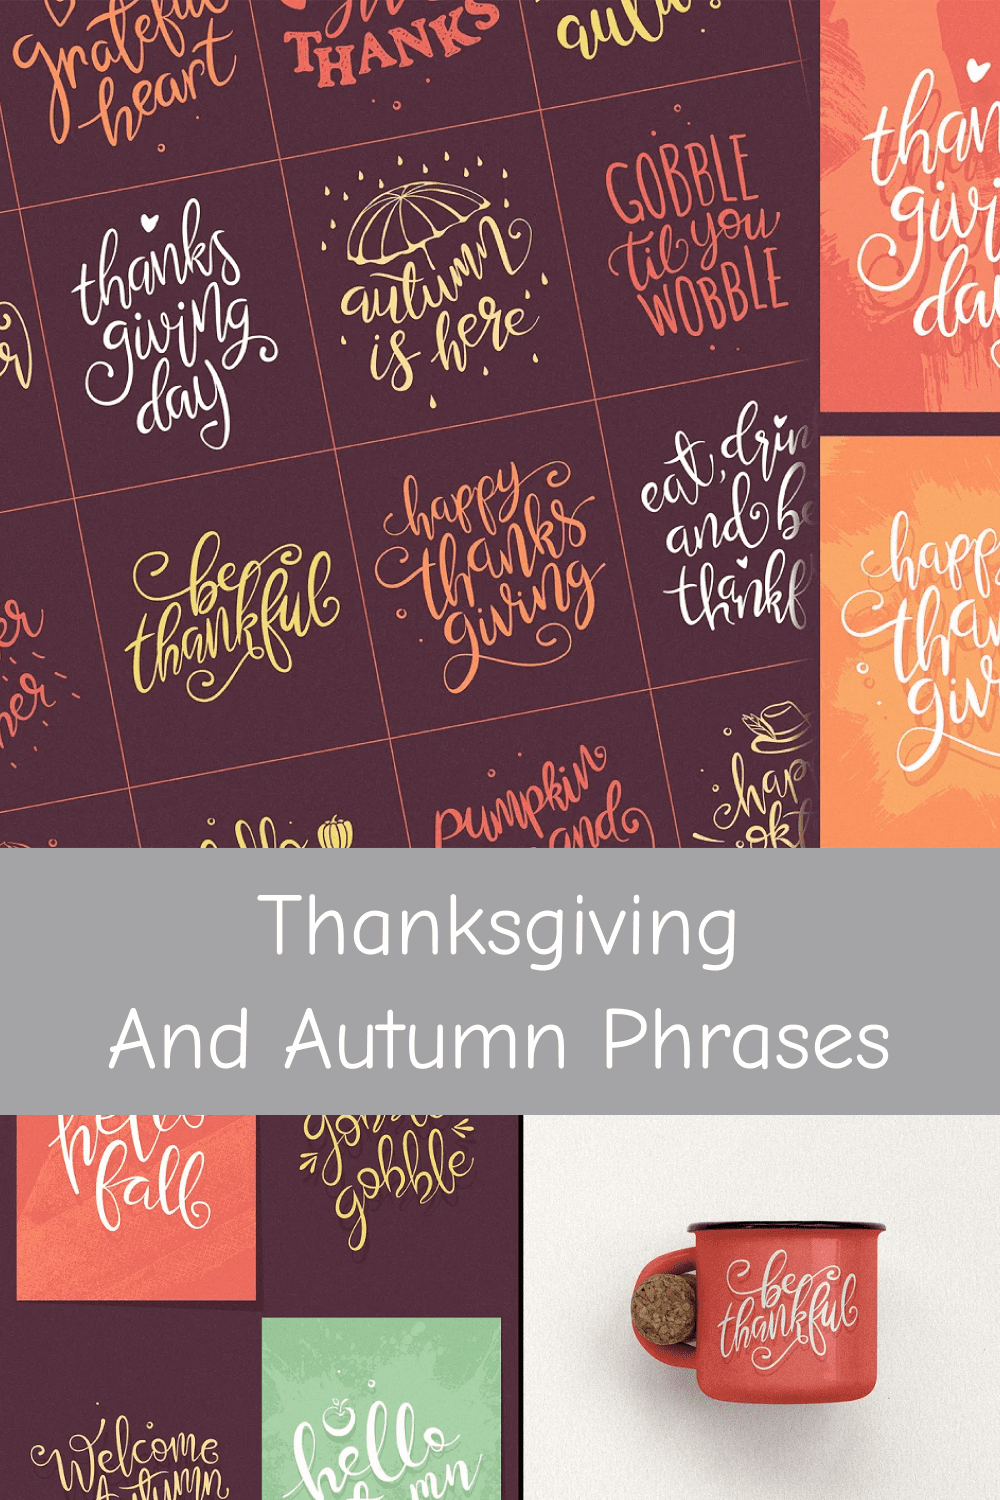 Thanksgiving and Autumn Phrases.